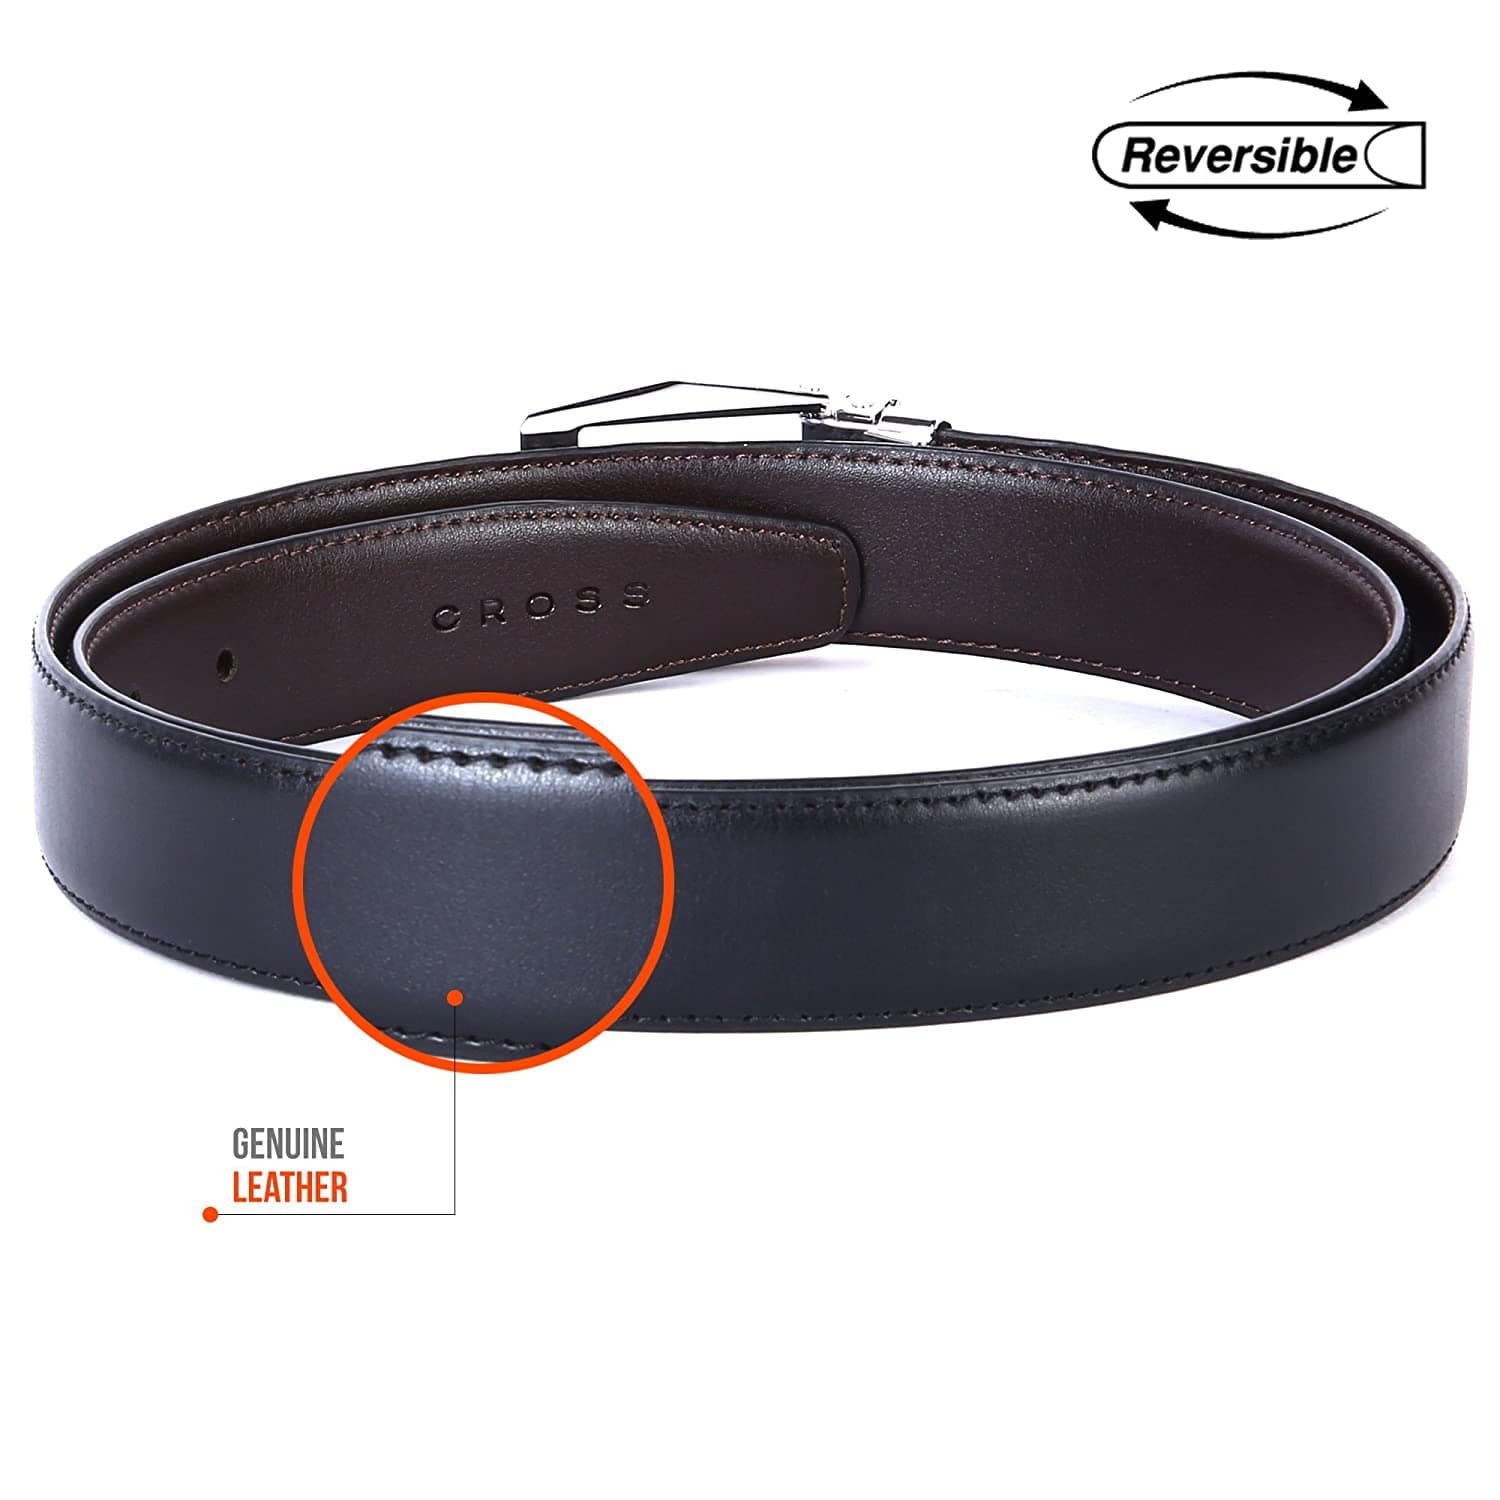 CROSS MEISTER PREMIUM LEATHER BELT WITH 30 MM PRONGED BUCKLE FOR MEN XL (112CM) - BLACK AND BROWN - AC1298198-2-XXL2